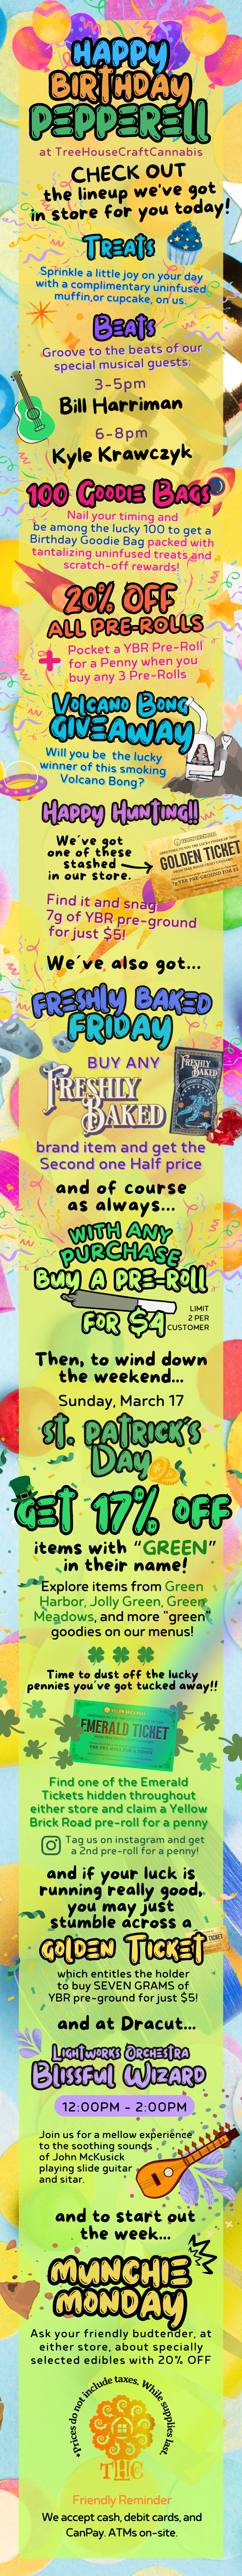 Treehouse Pepperell Birthday Deals